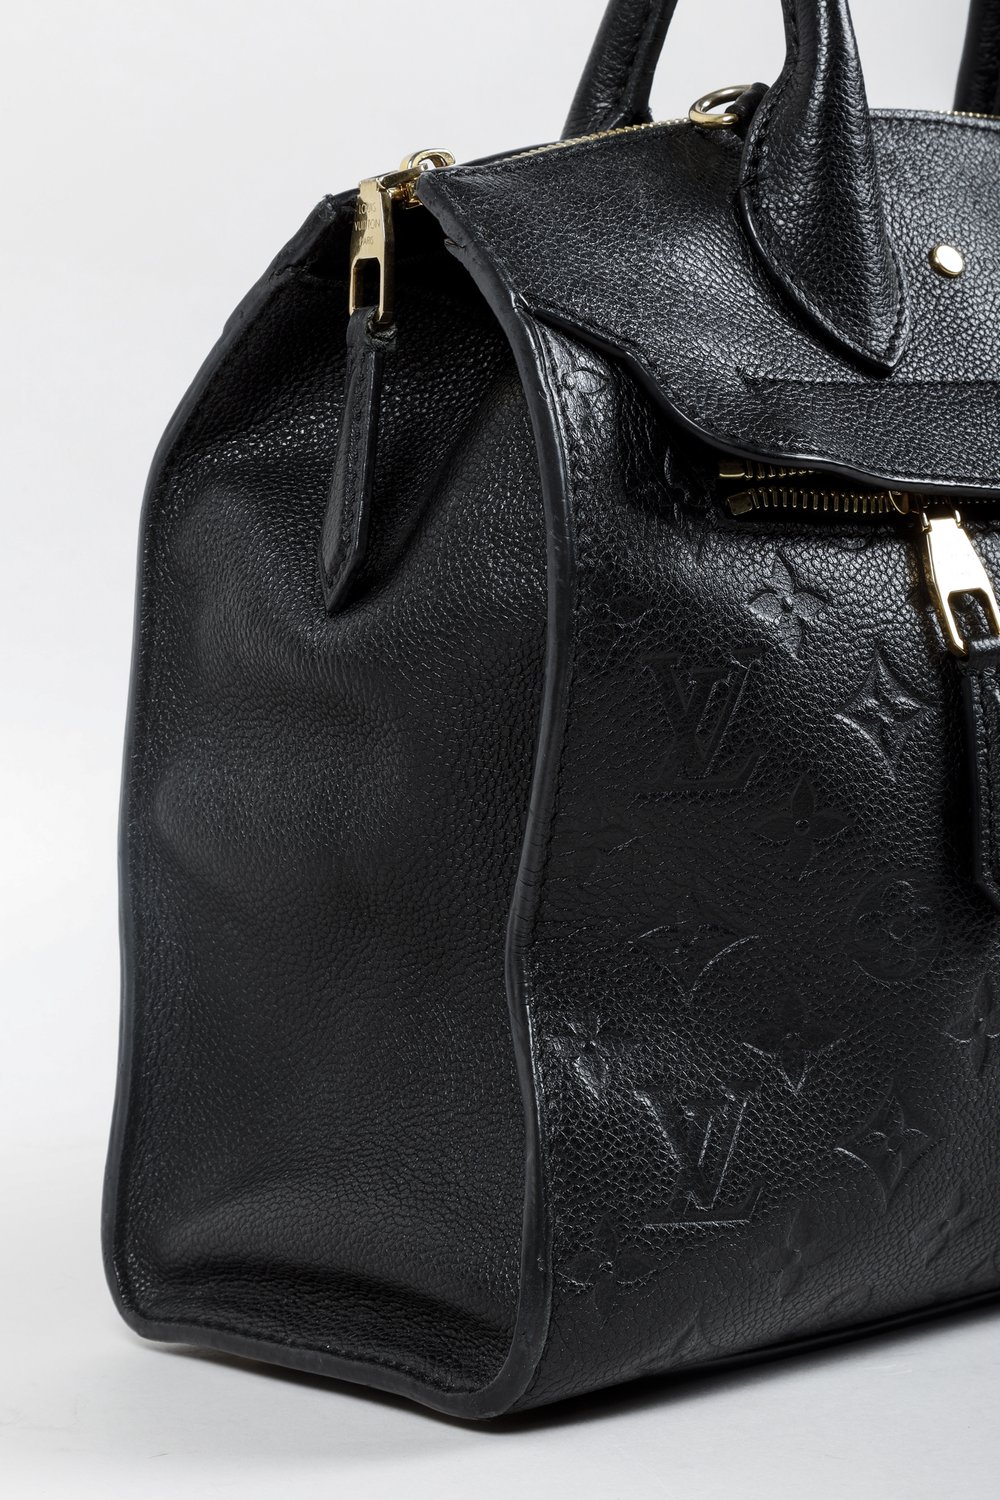 lv embossed leather bag